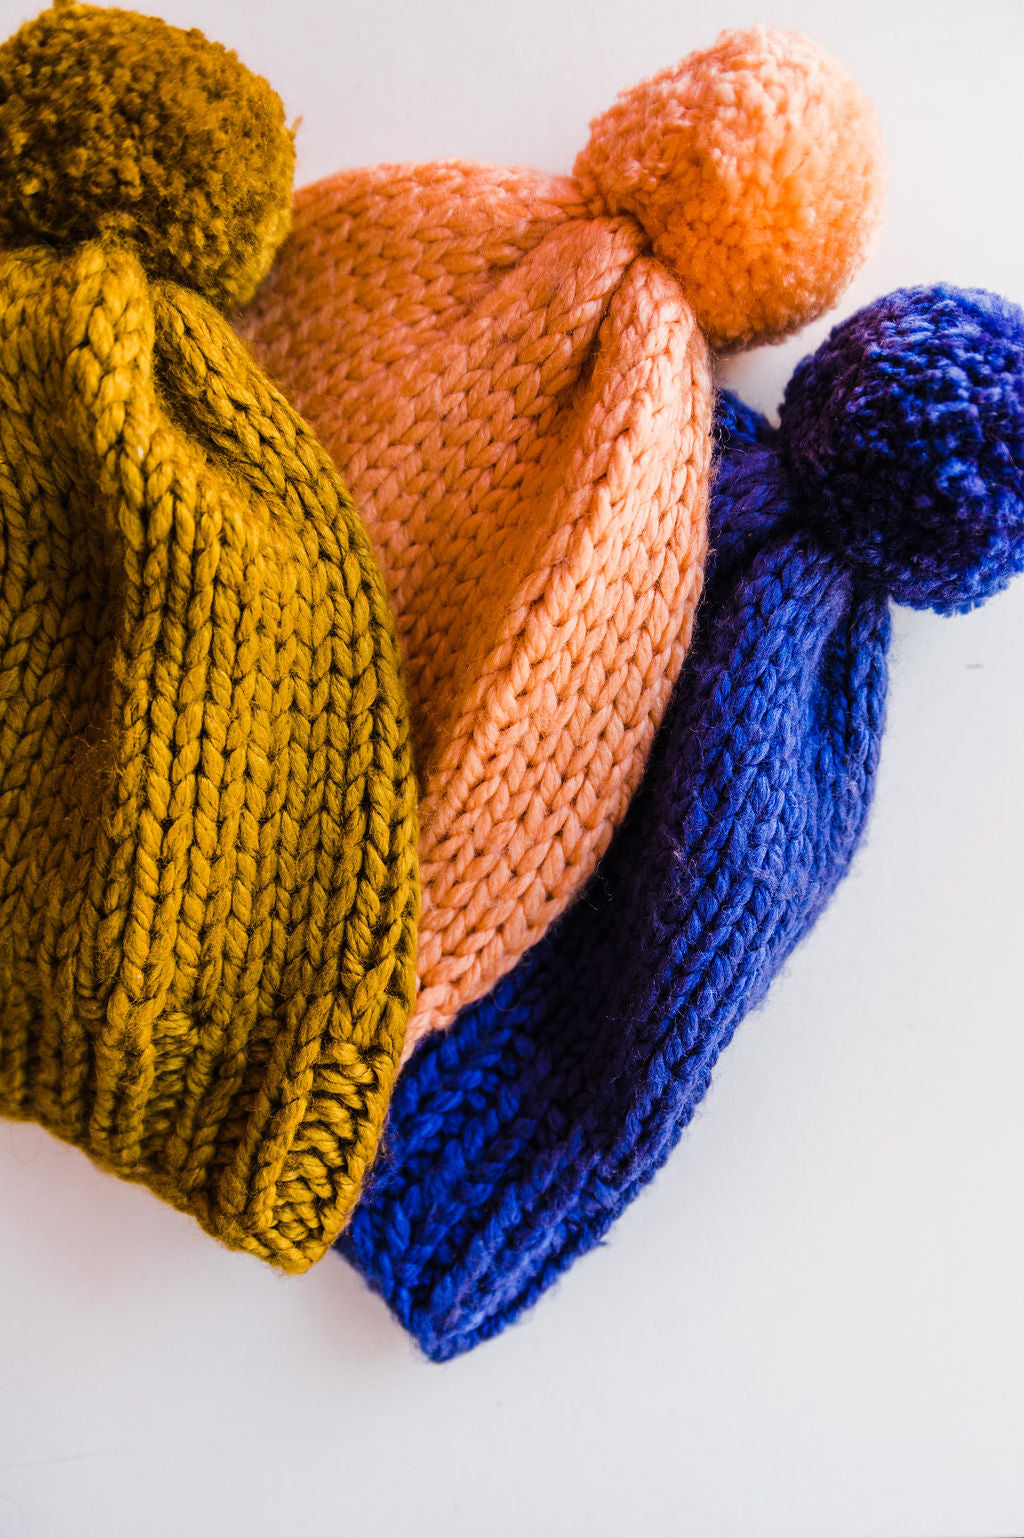 The Design: Our hand-knitted beanie is made of a wool blend, and is thick and cozy! With colors in spice, cobalt, and peach even the grayest day will have a pop of happy. Made in India 80% acrylic 20% wool Hand knit with hand made Pom Pom Care: Wash on gentle cycle. Lay flat to dry. Ramble & Co. is a family owned business. Shop at shop.rambleandcompany.com or visit our store in Wichita Falls, Texas || small batch/ hand printed tees + fine art prints | your source of encouragement + inspiration.